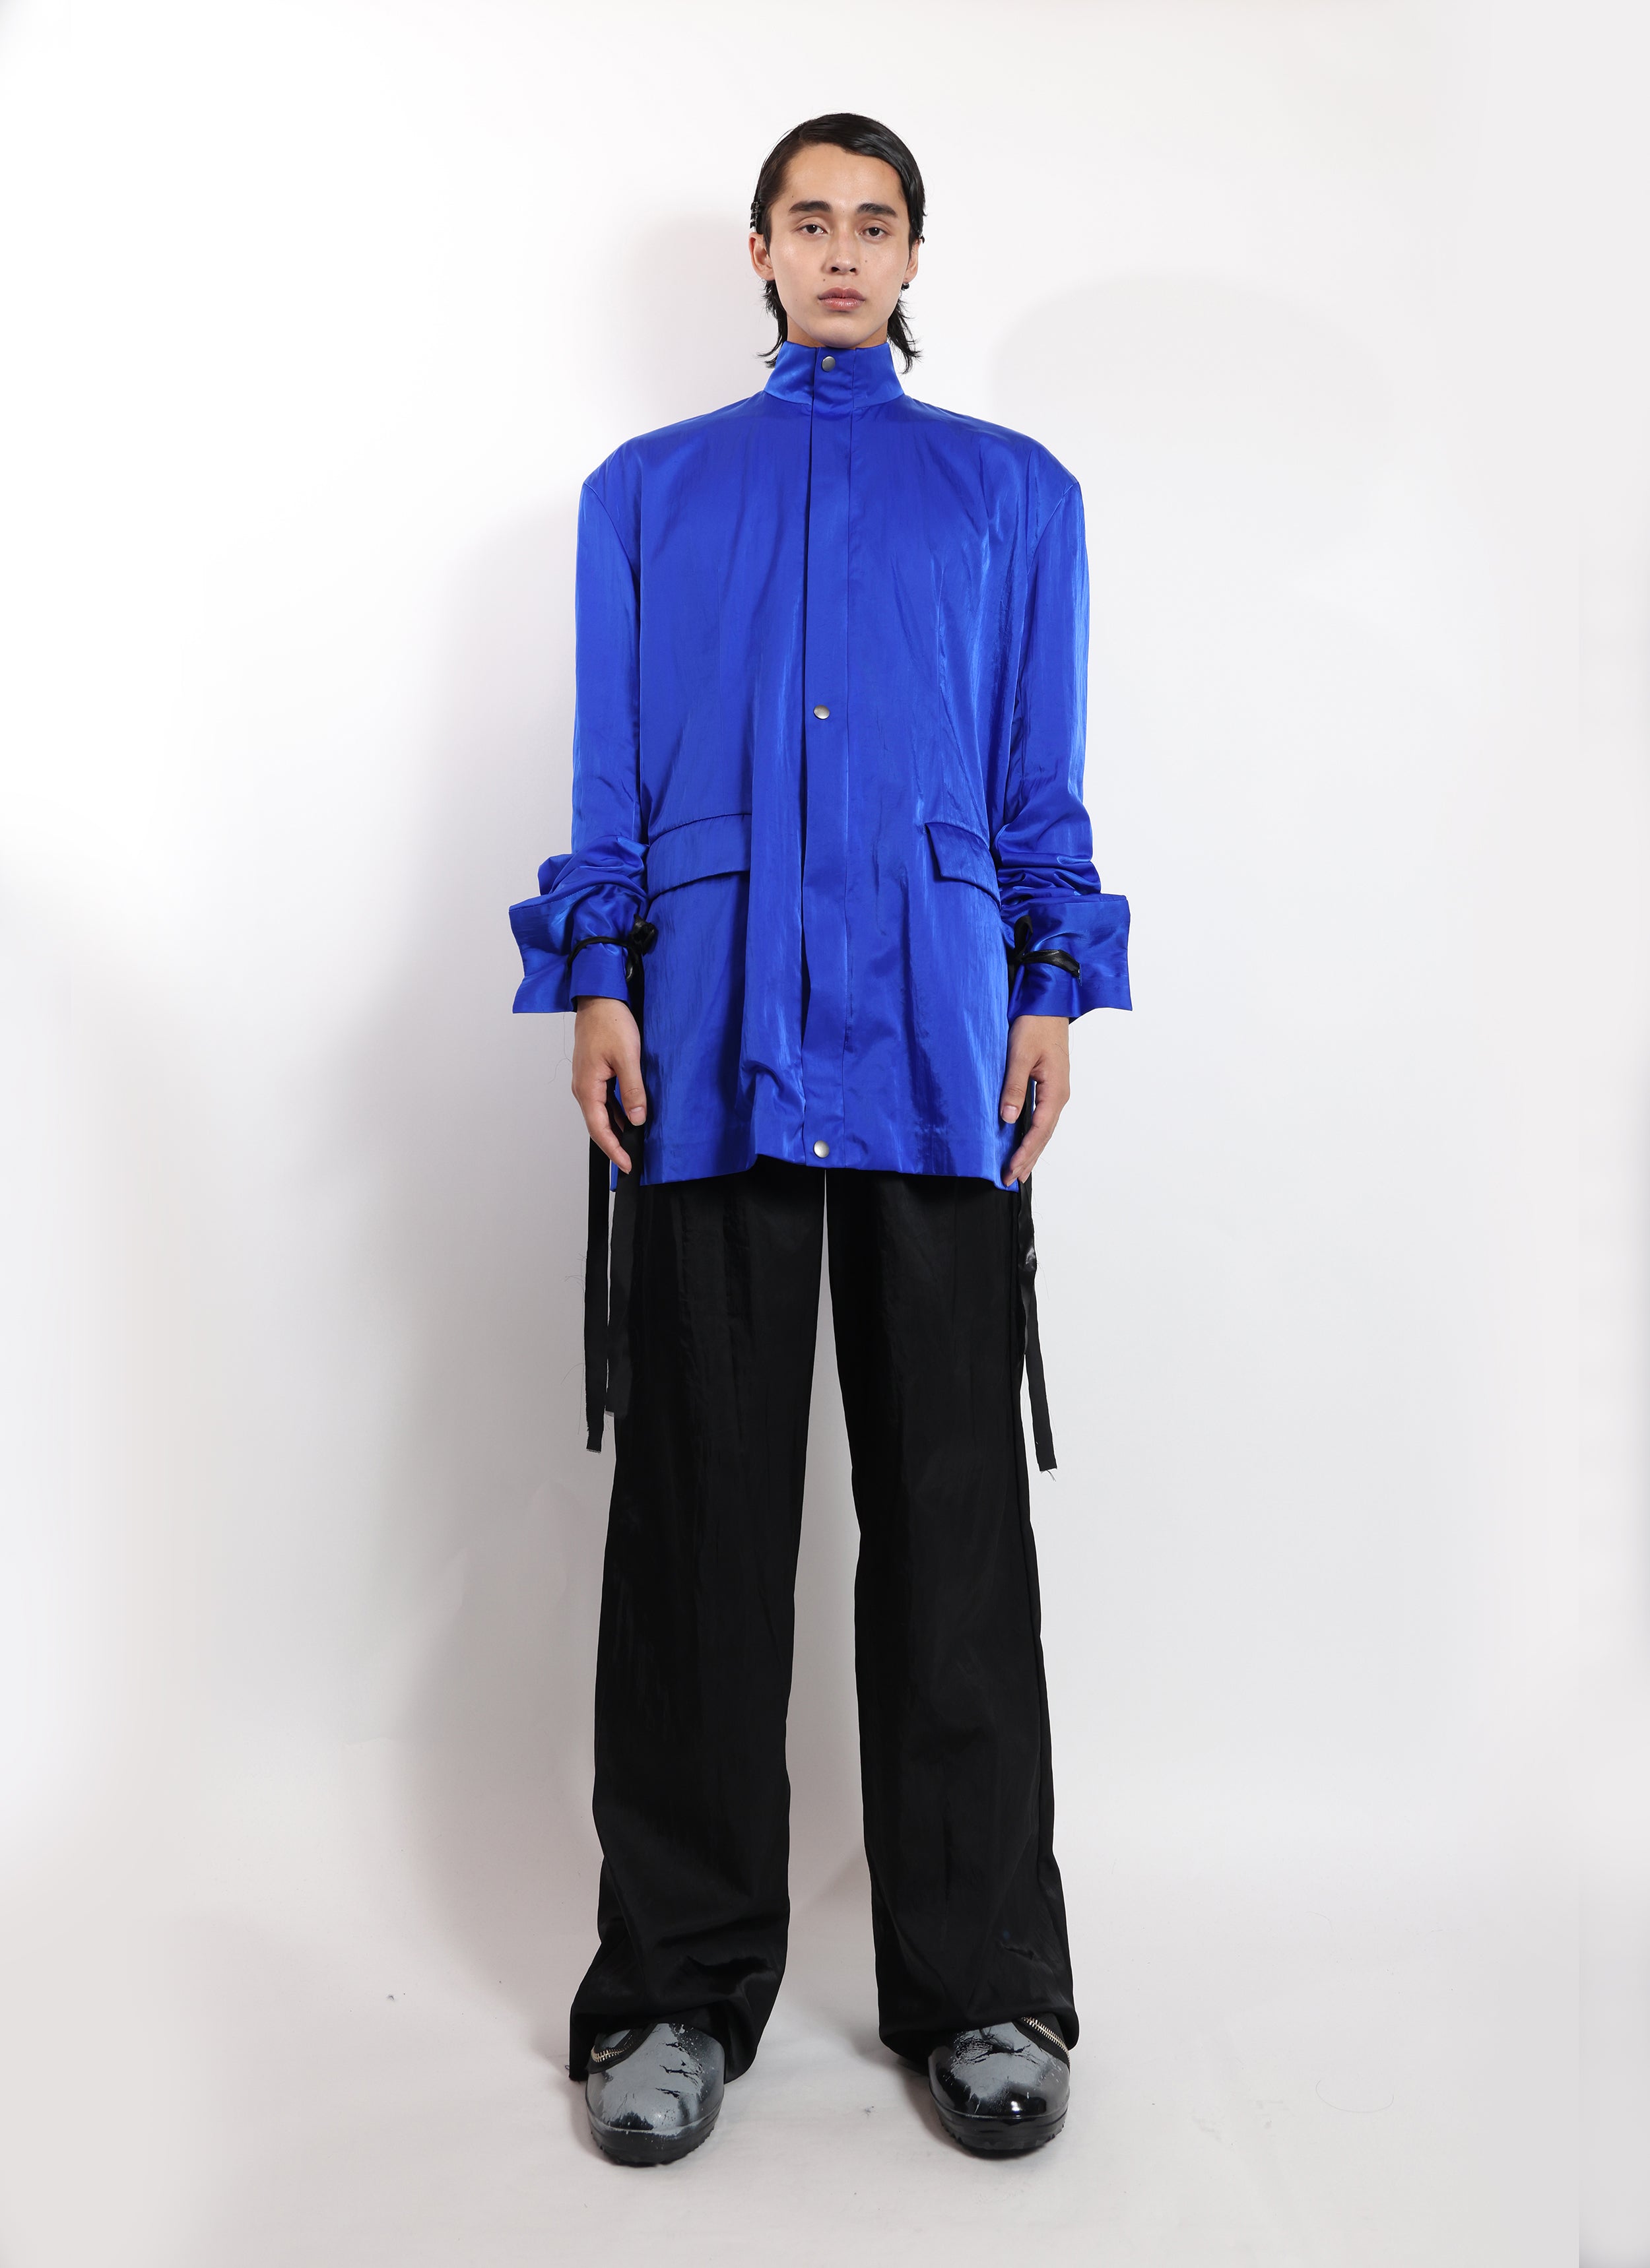 Stand Collar Oversize Suit